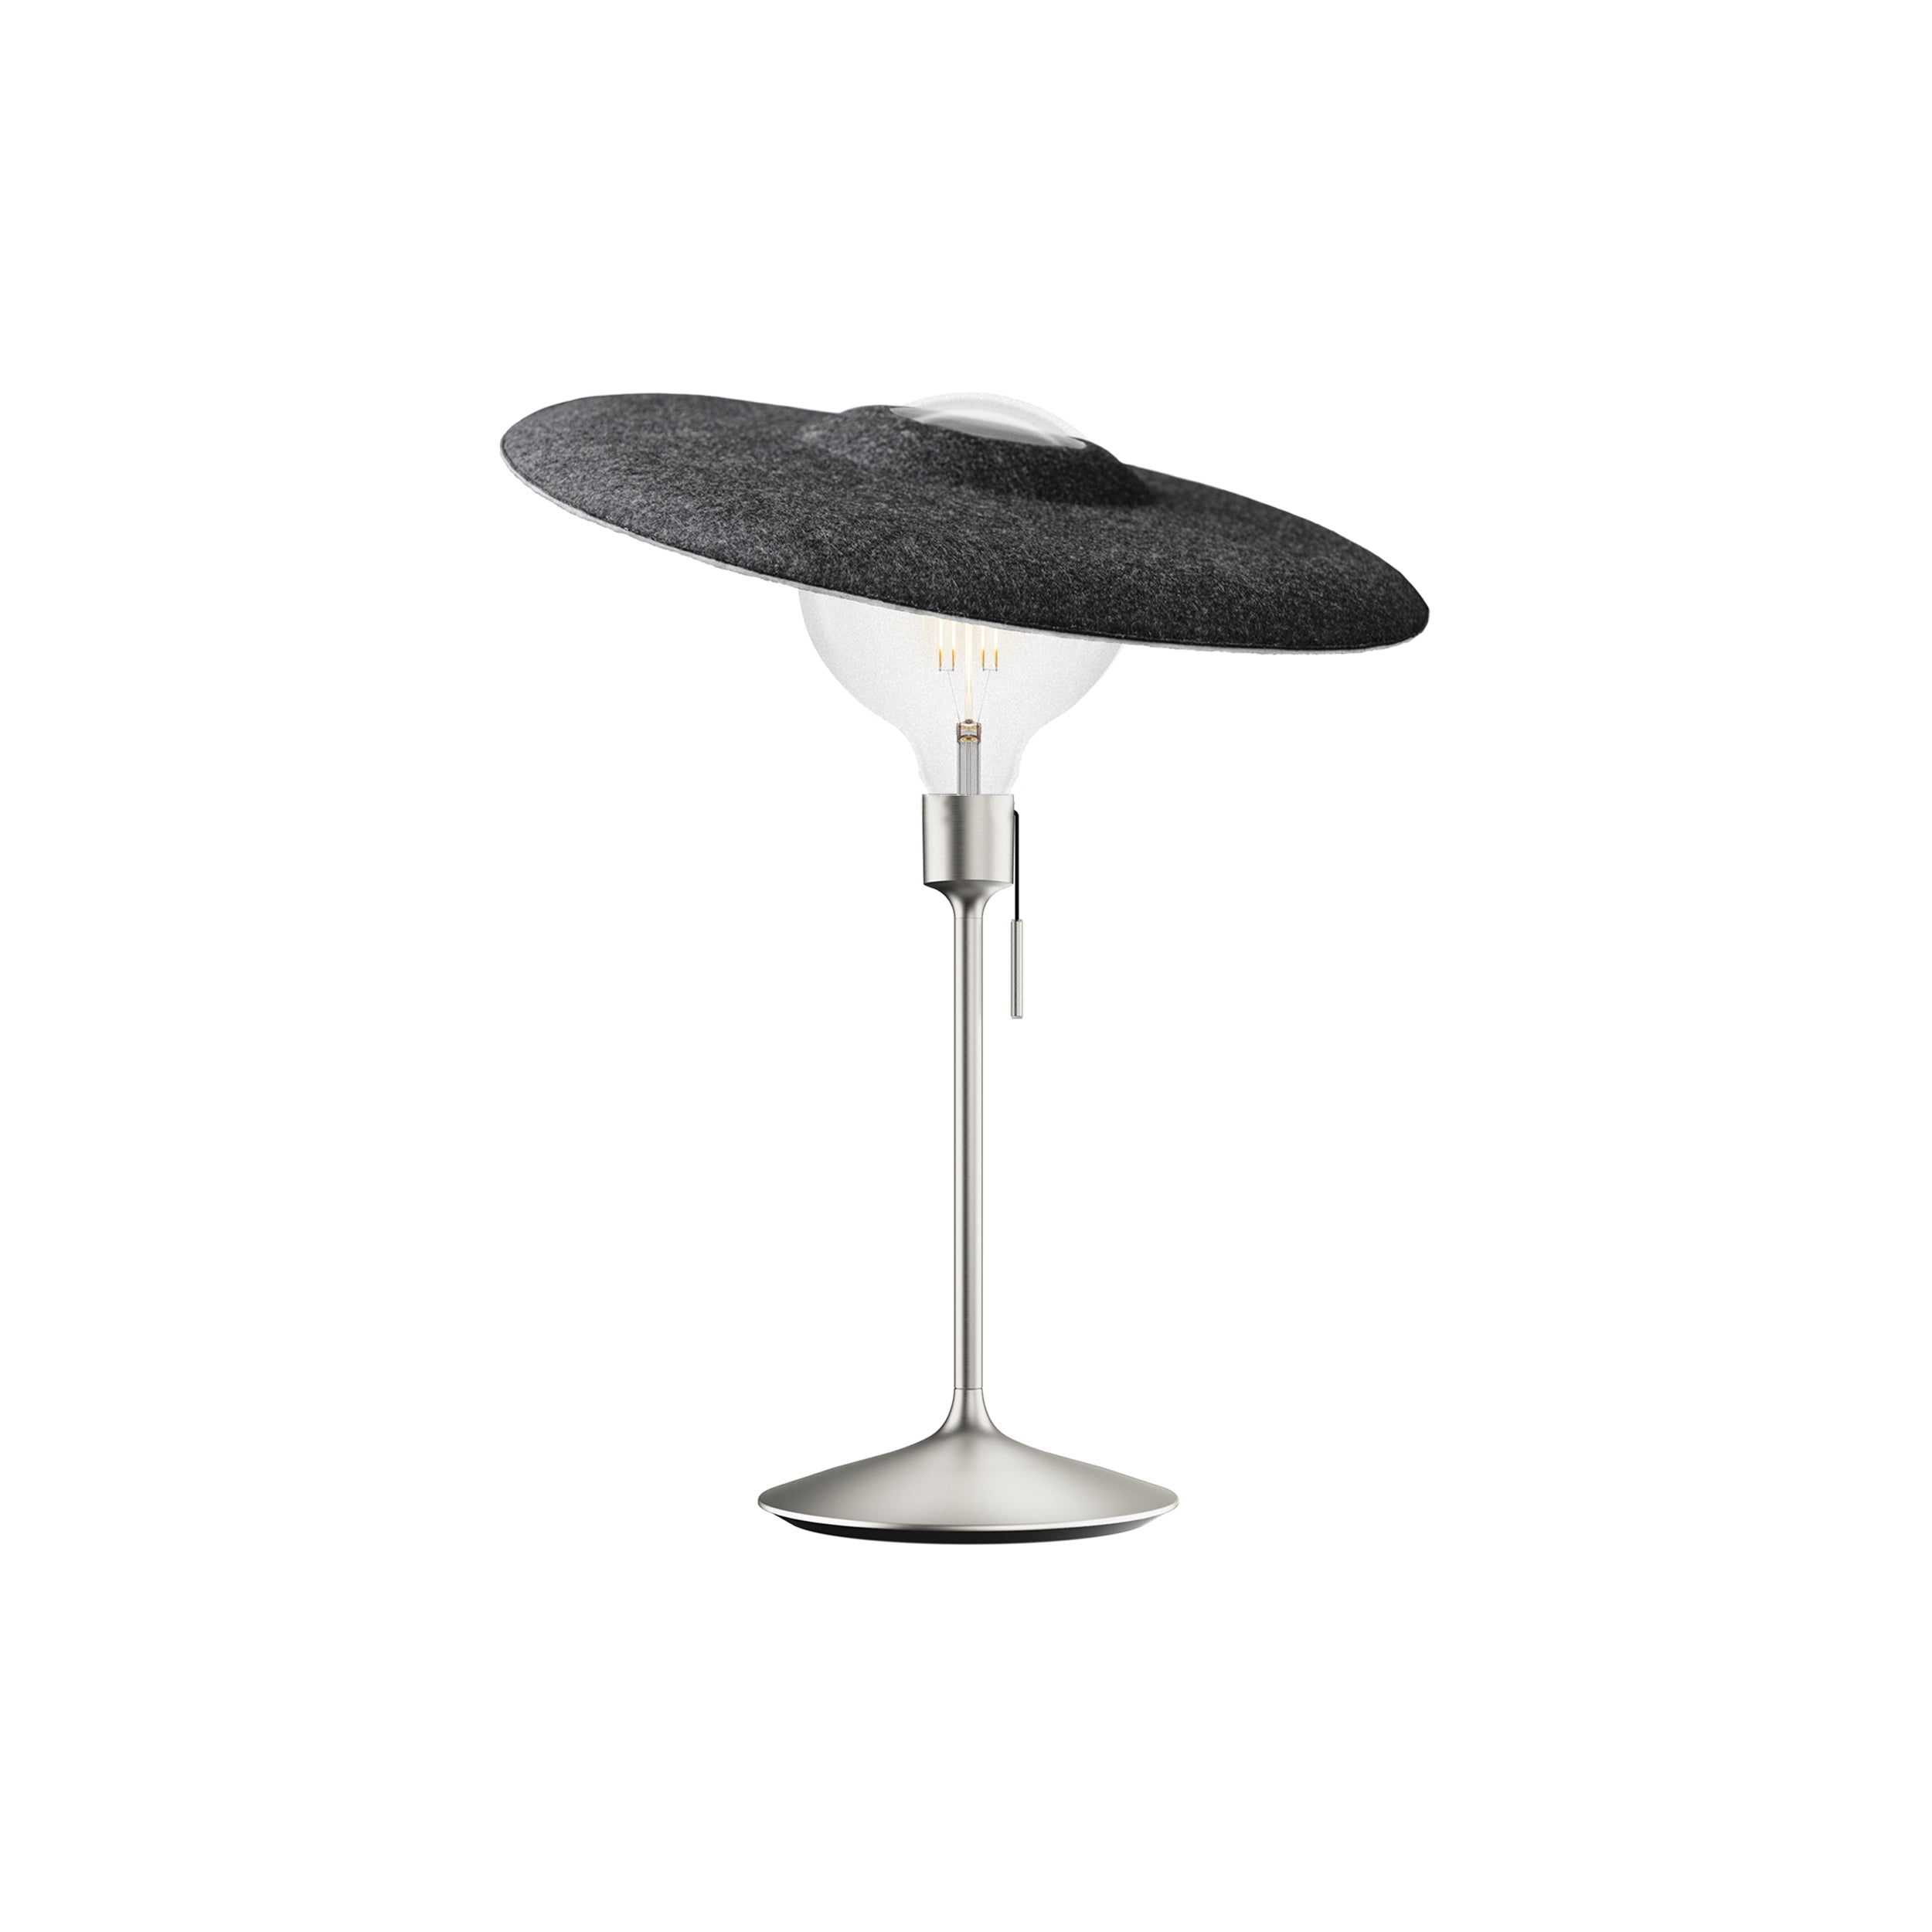 Shade Champagne Table Lamp: Brushed Steel + With Bulb (3 W)